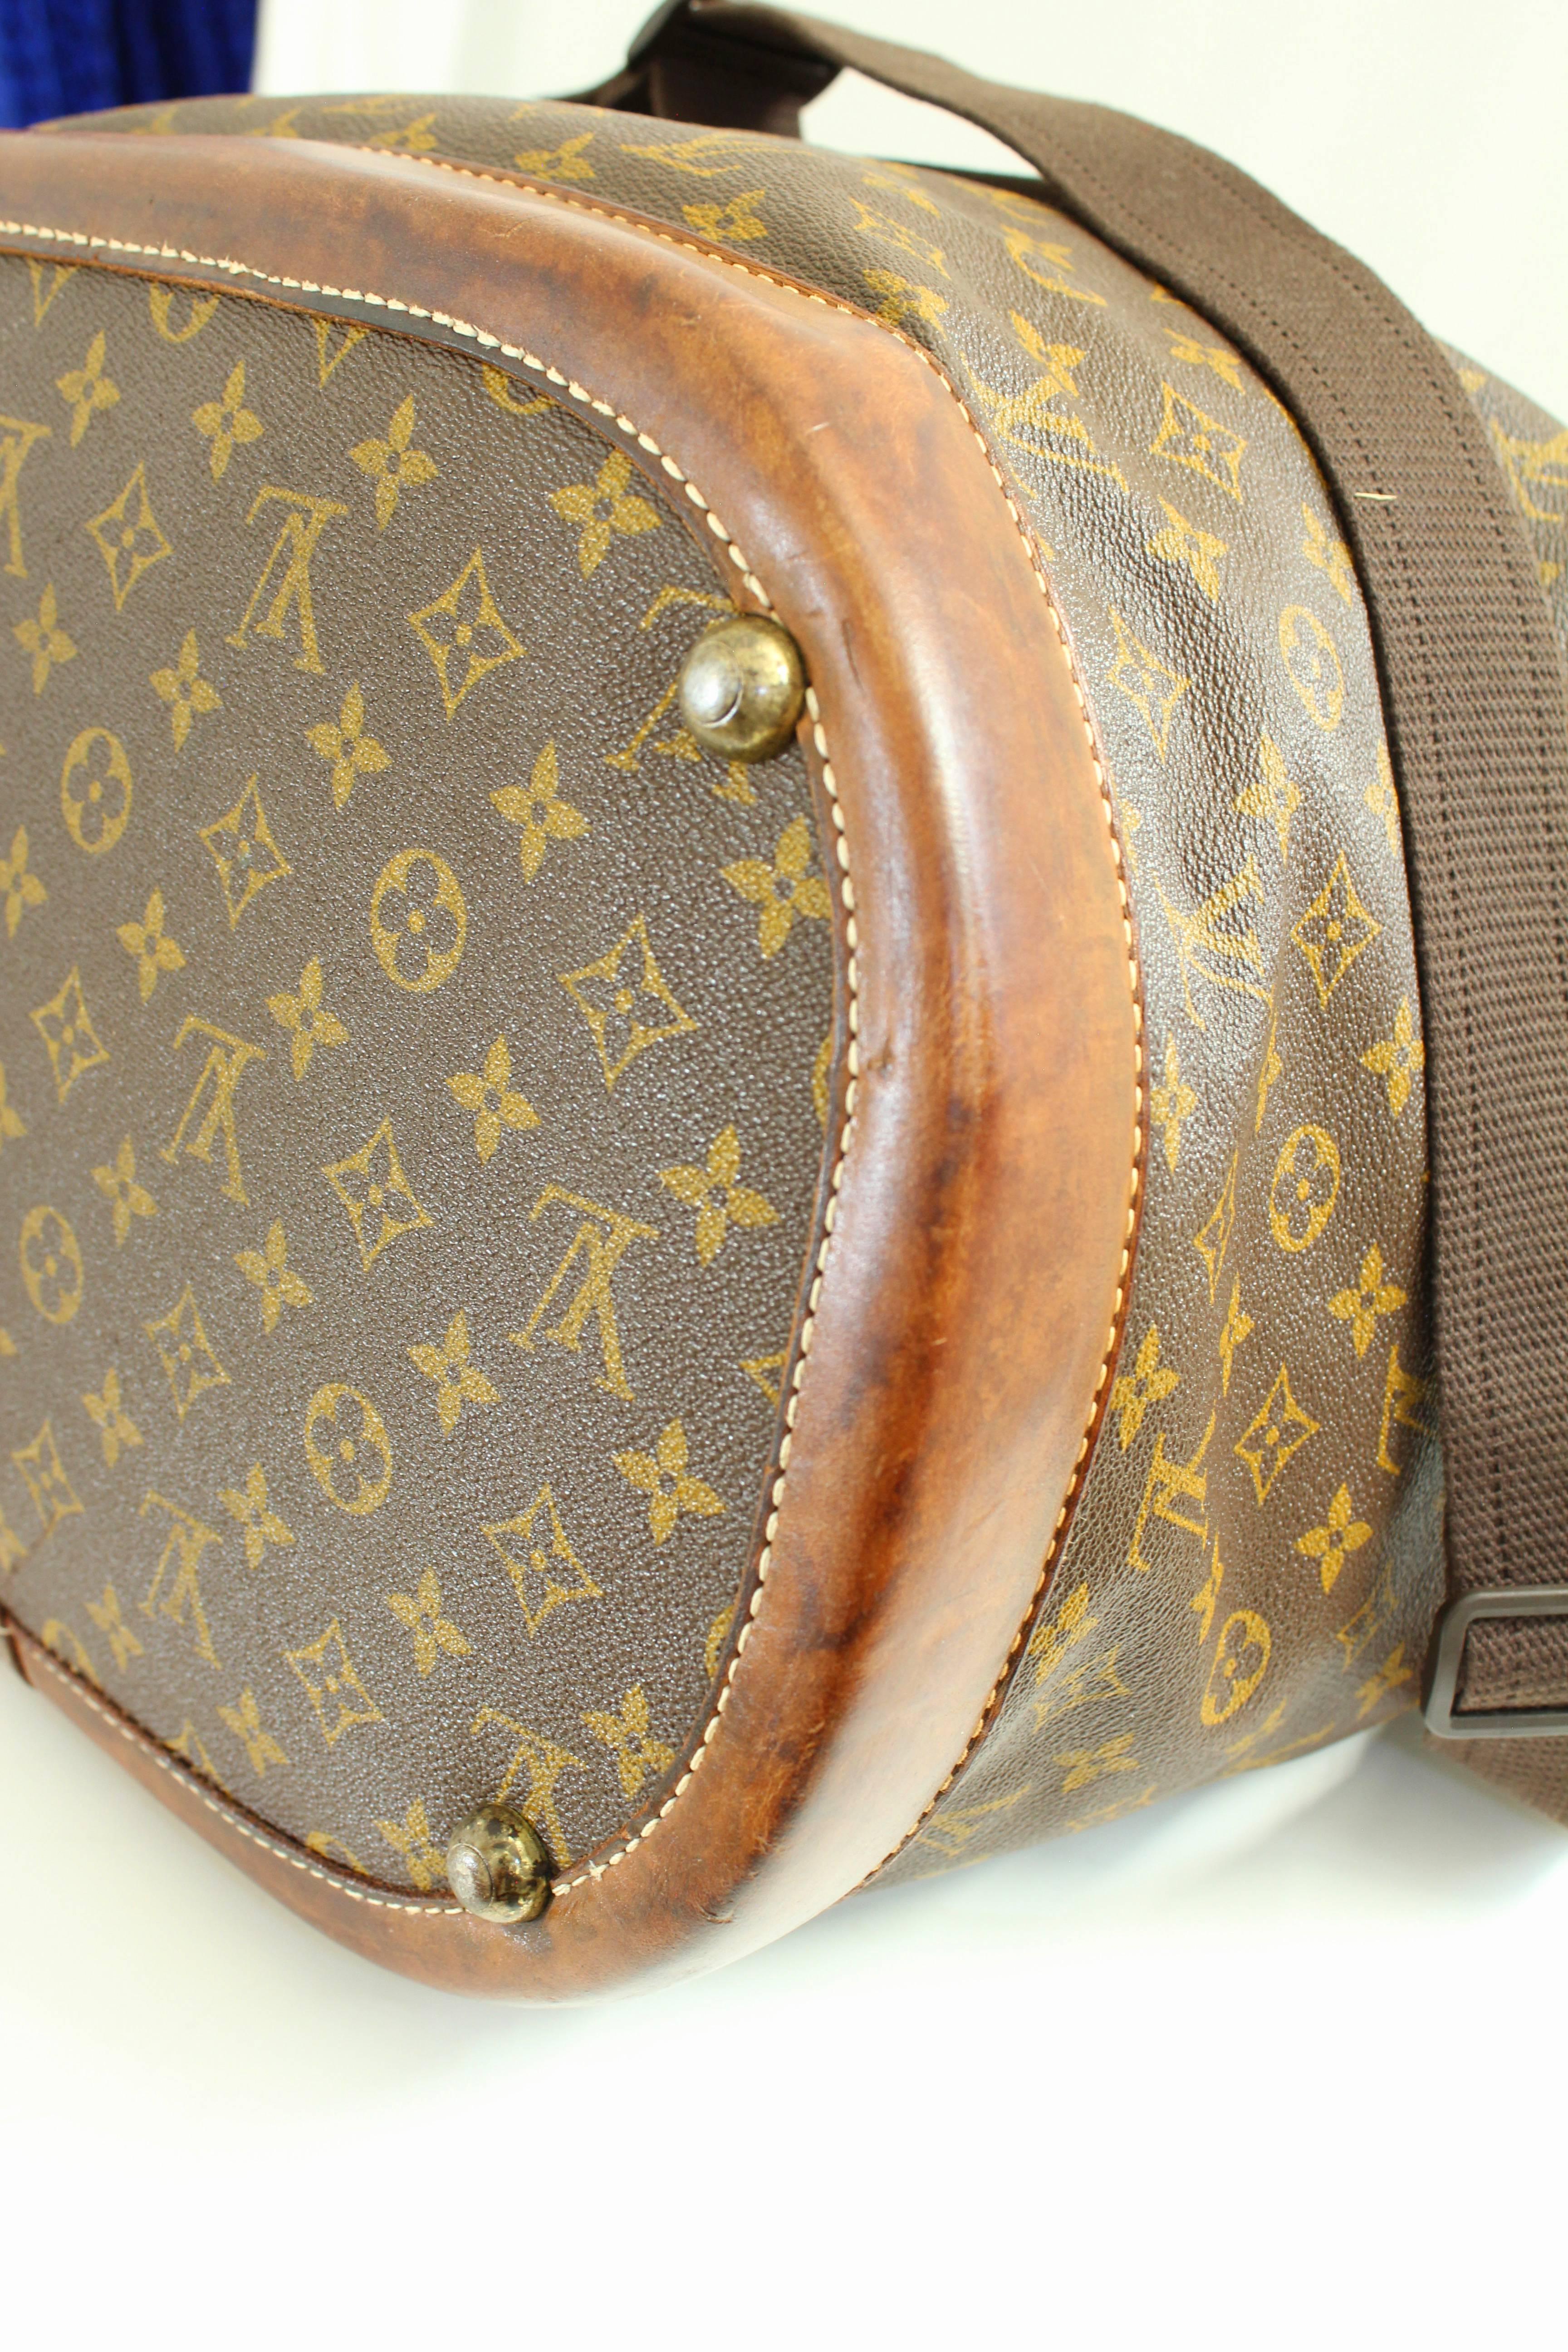 Louis Vuitton Large Steamer Bag Keepall Monogram Travel Tote French Company 70er Jahre 4